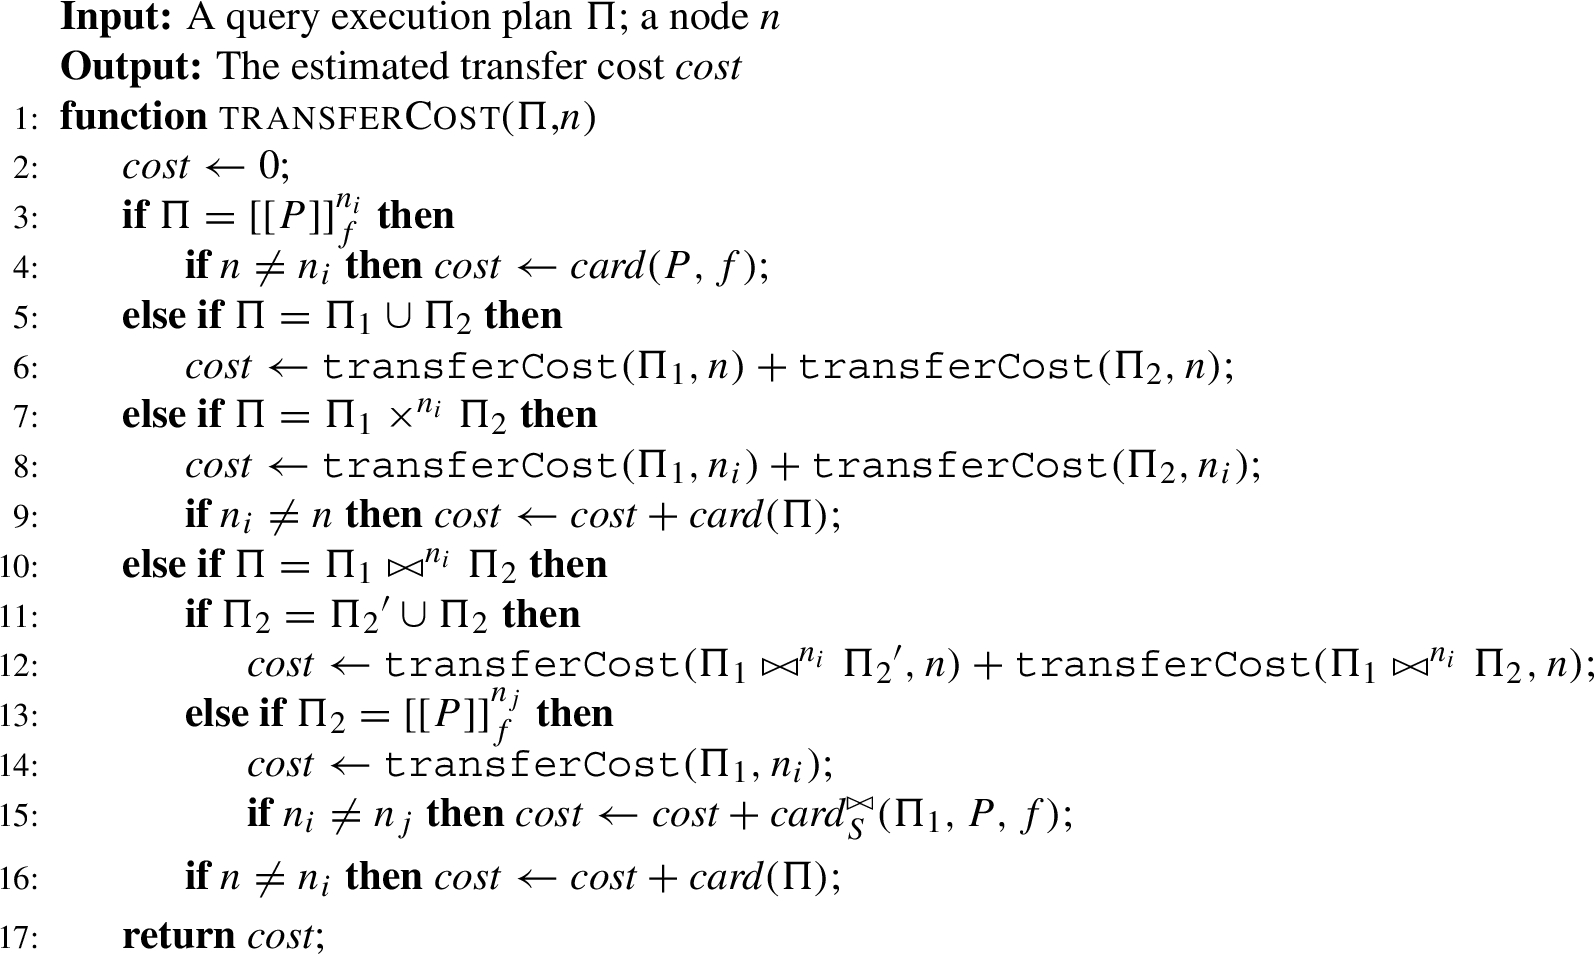 Compute the transfer cost of a query execution plan